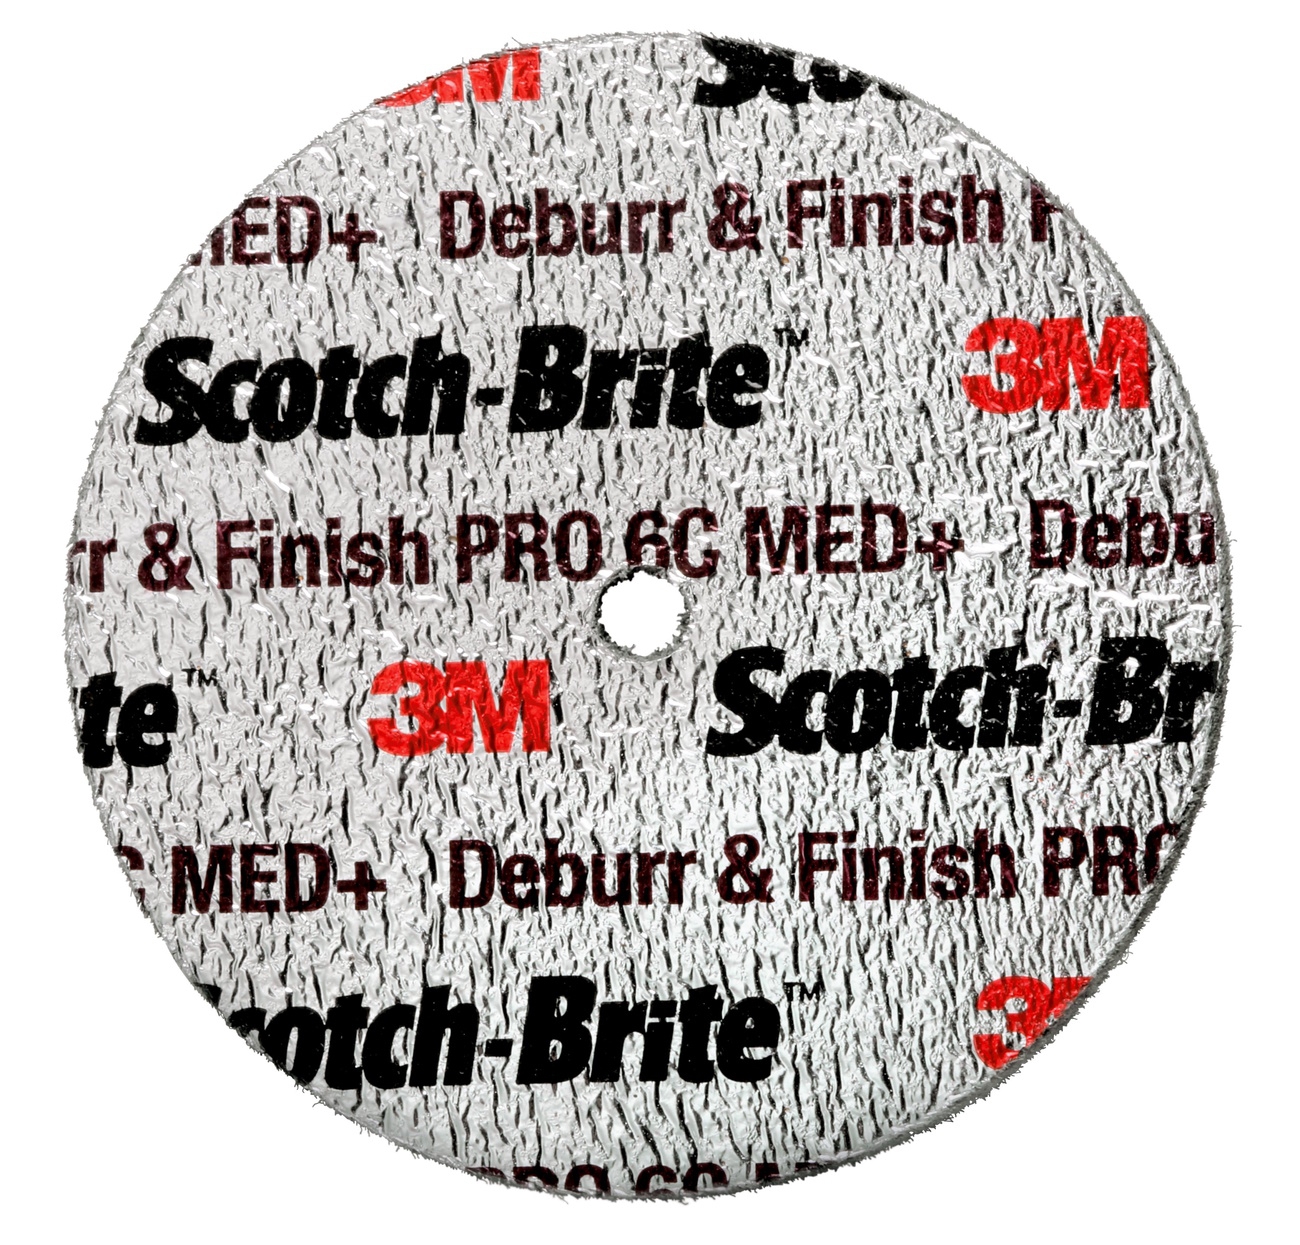 3M Scotch-Brite Deburr and Finish PRO compact disc DP-UW, 152 mm x 6.35 mm x 25.4 mm, 6C Med+, 8 WL